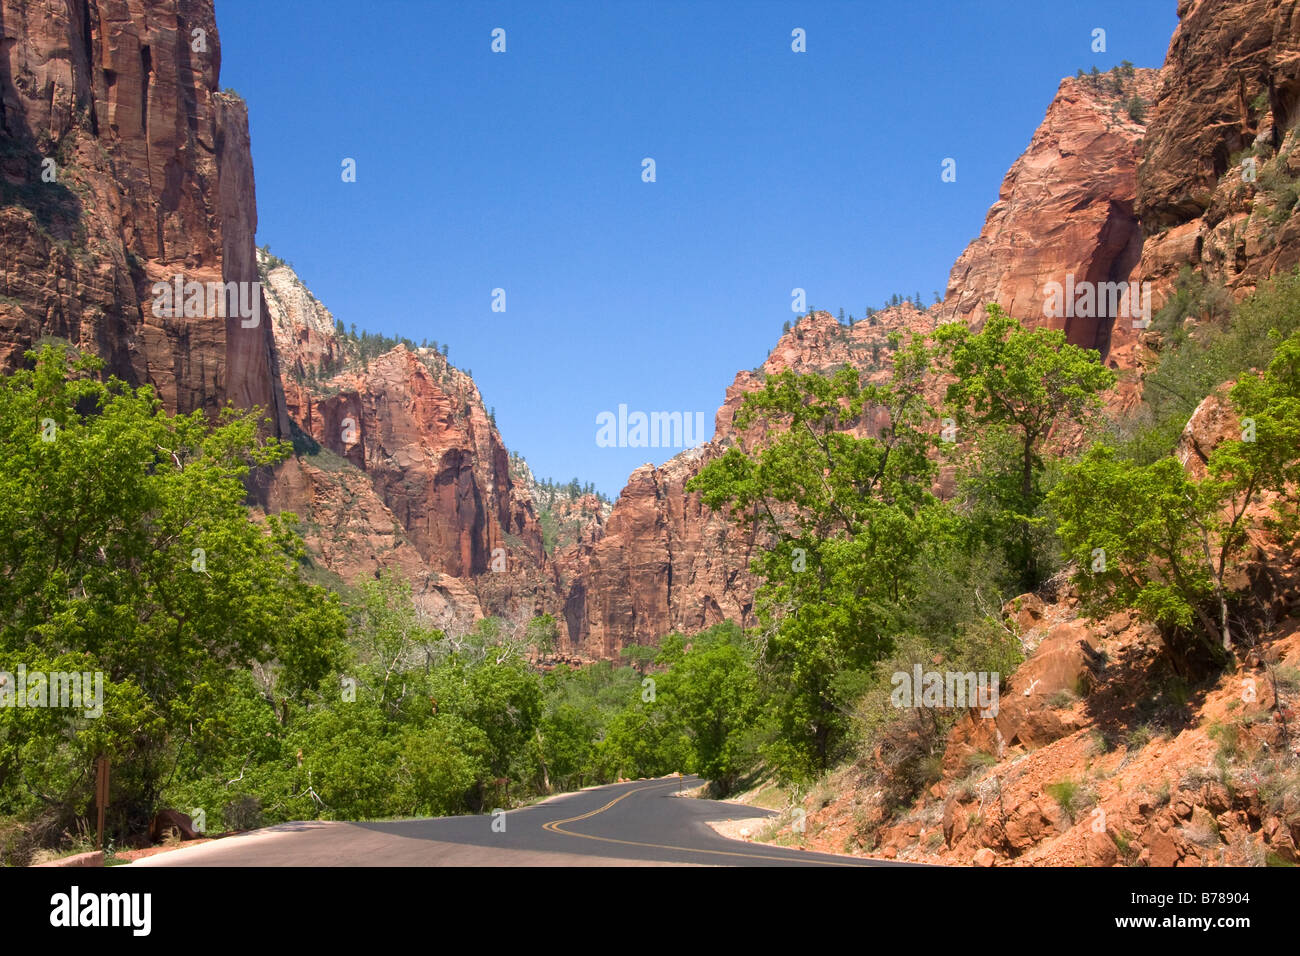 Zion Canyon Scenic Drive winds up Zion Canyon in Zion National Park Utah Stock Photo